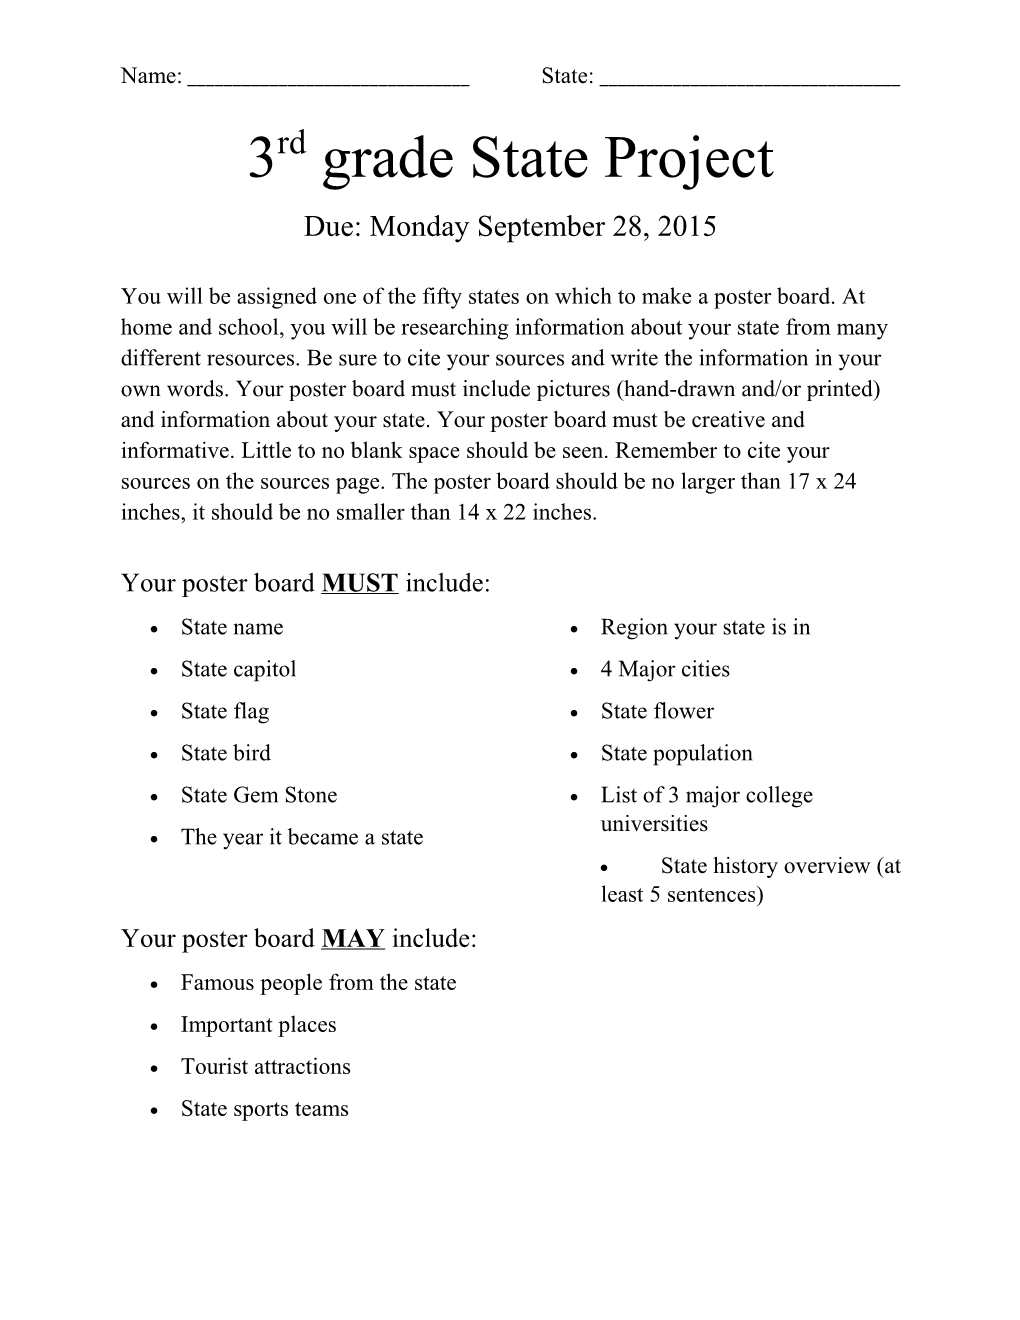 3Rd Grade State Project